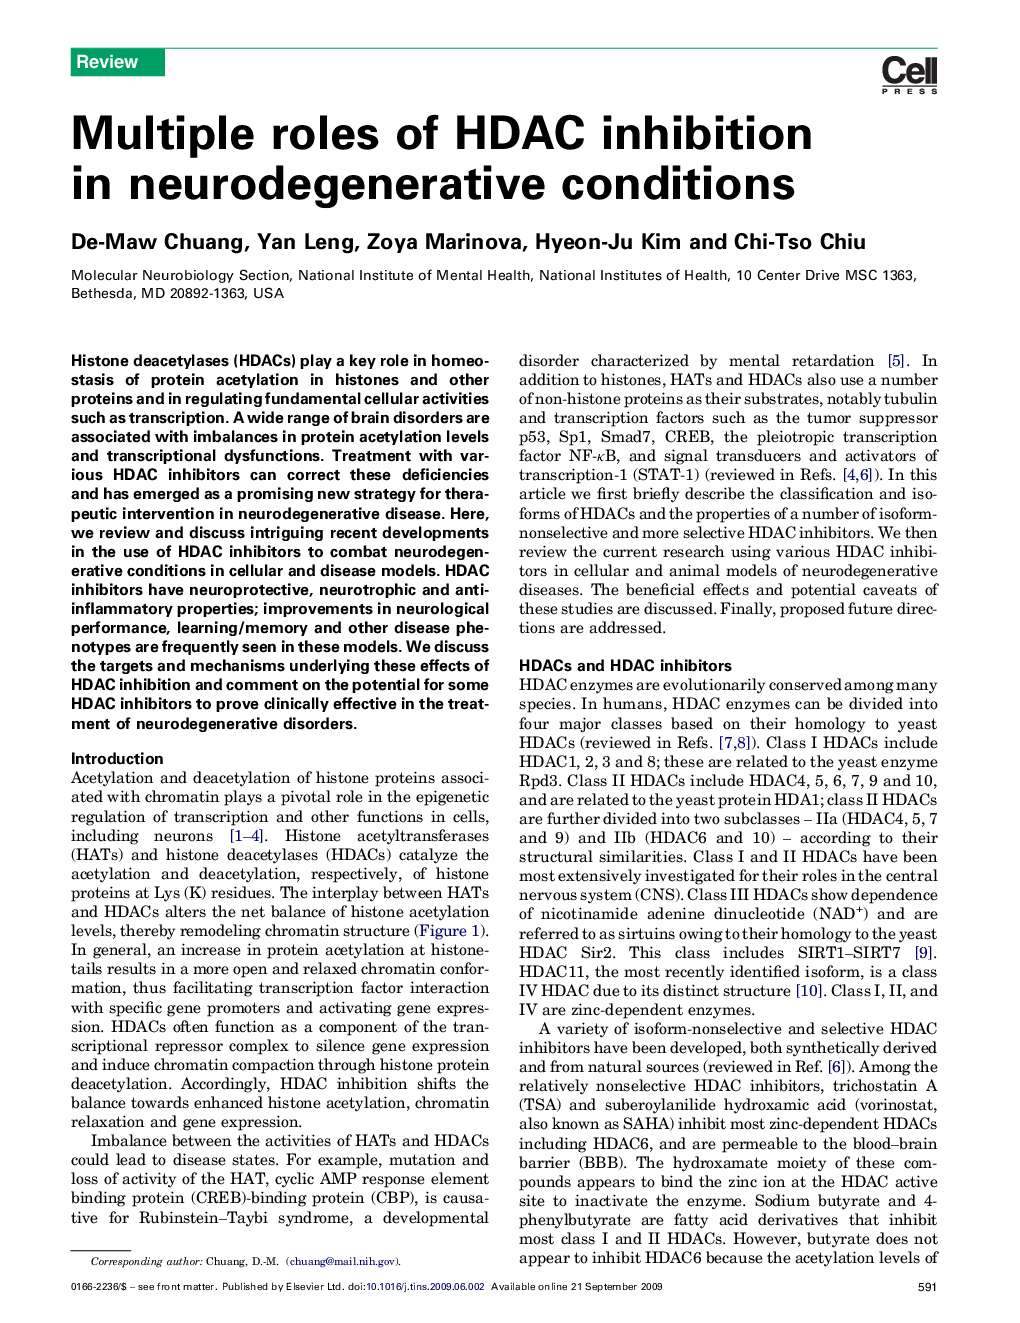 Multiple roles of HDAC inhibition in neurodegenerative conditions